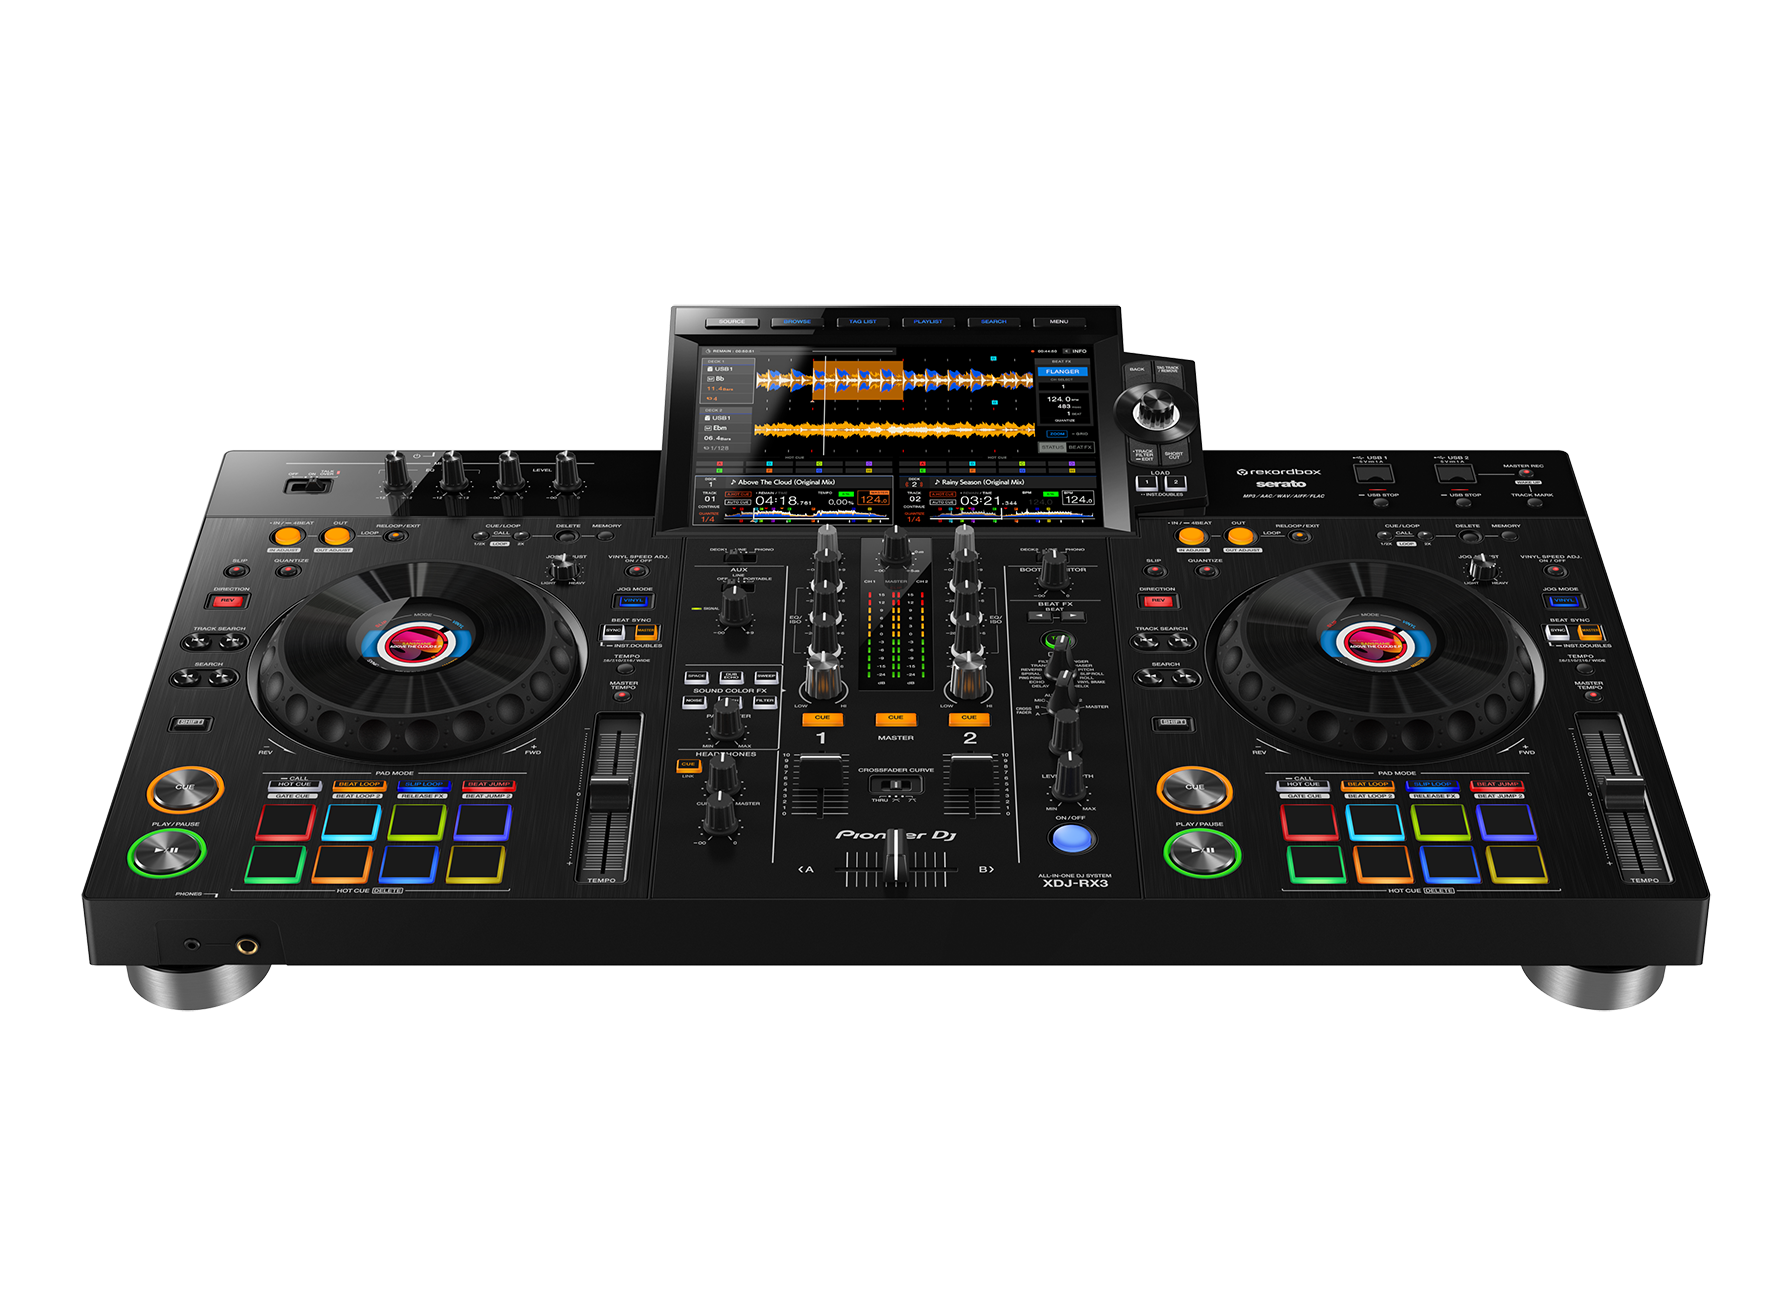 XDJ-RX3 - 2-channel performance all-in-one DJ system